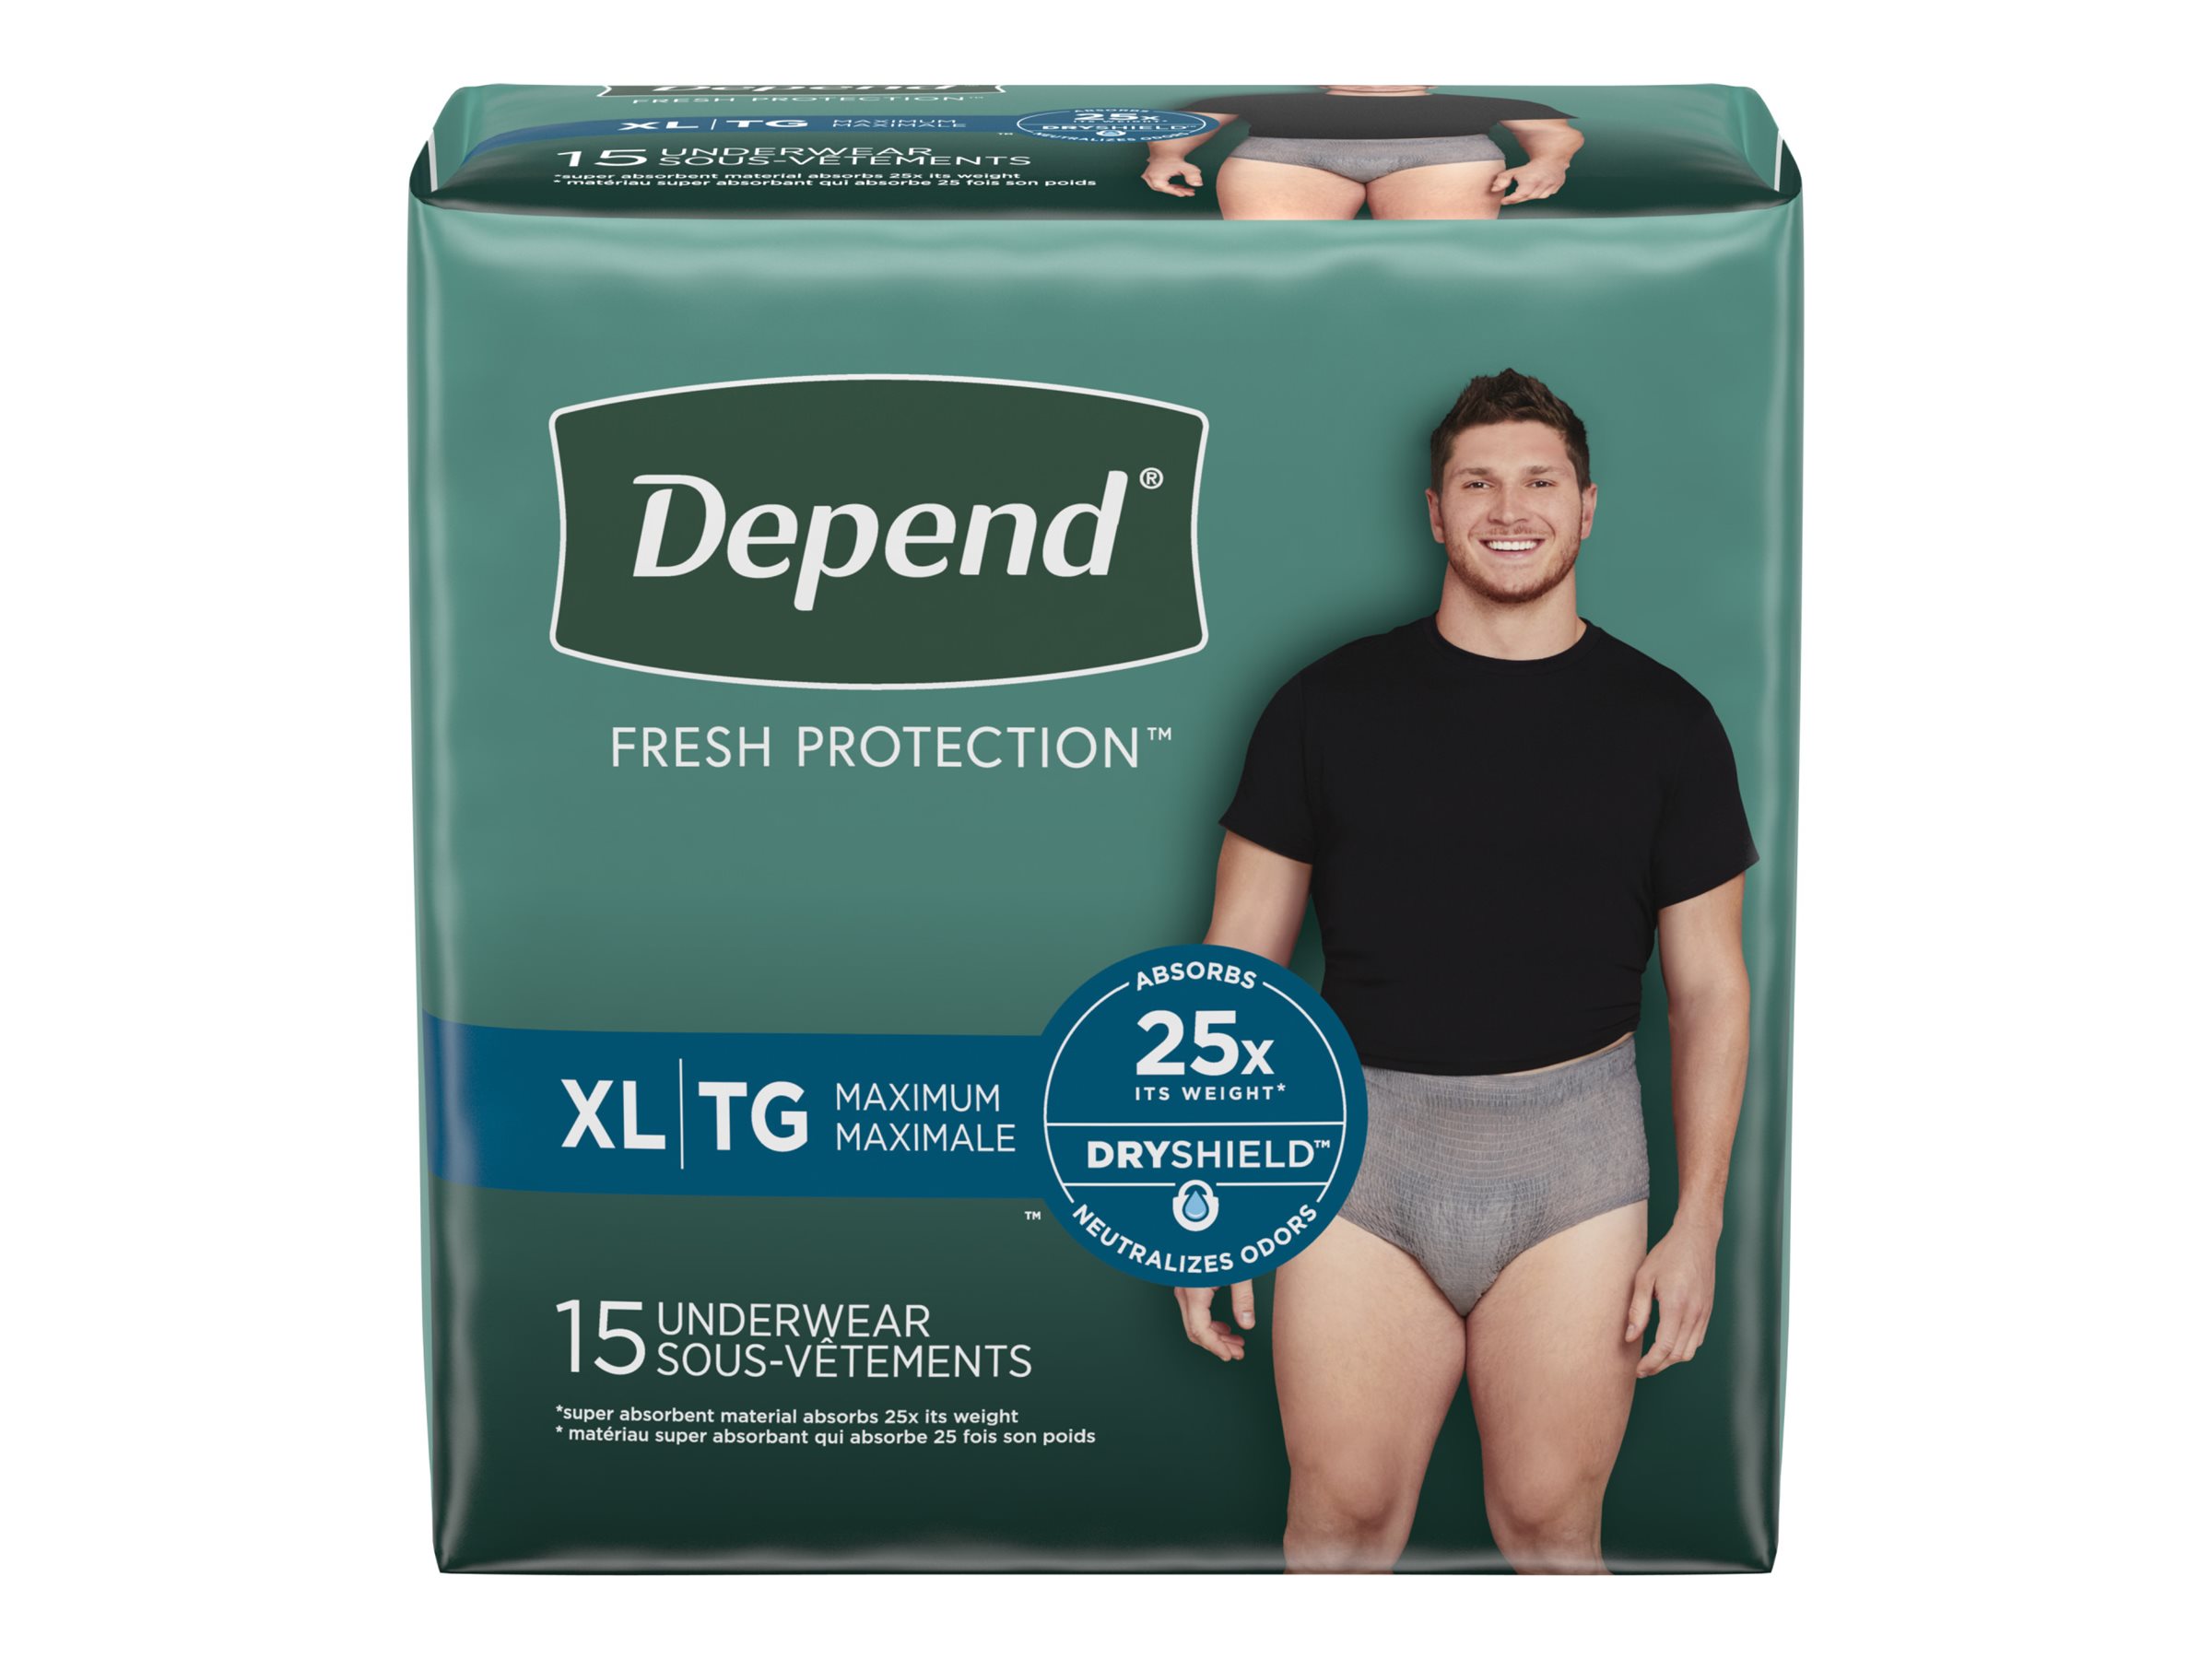 Depend Fresh Protection Adult Incontinence Underwear for Men - Grey -  Maximum - Extra-Large - 15 Count